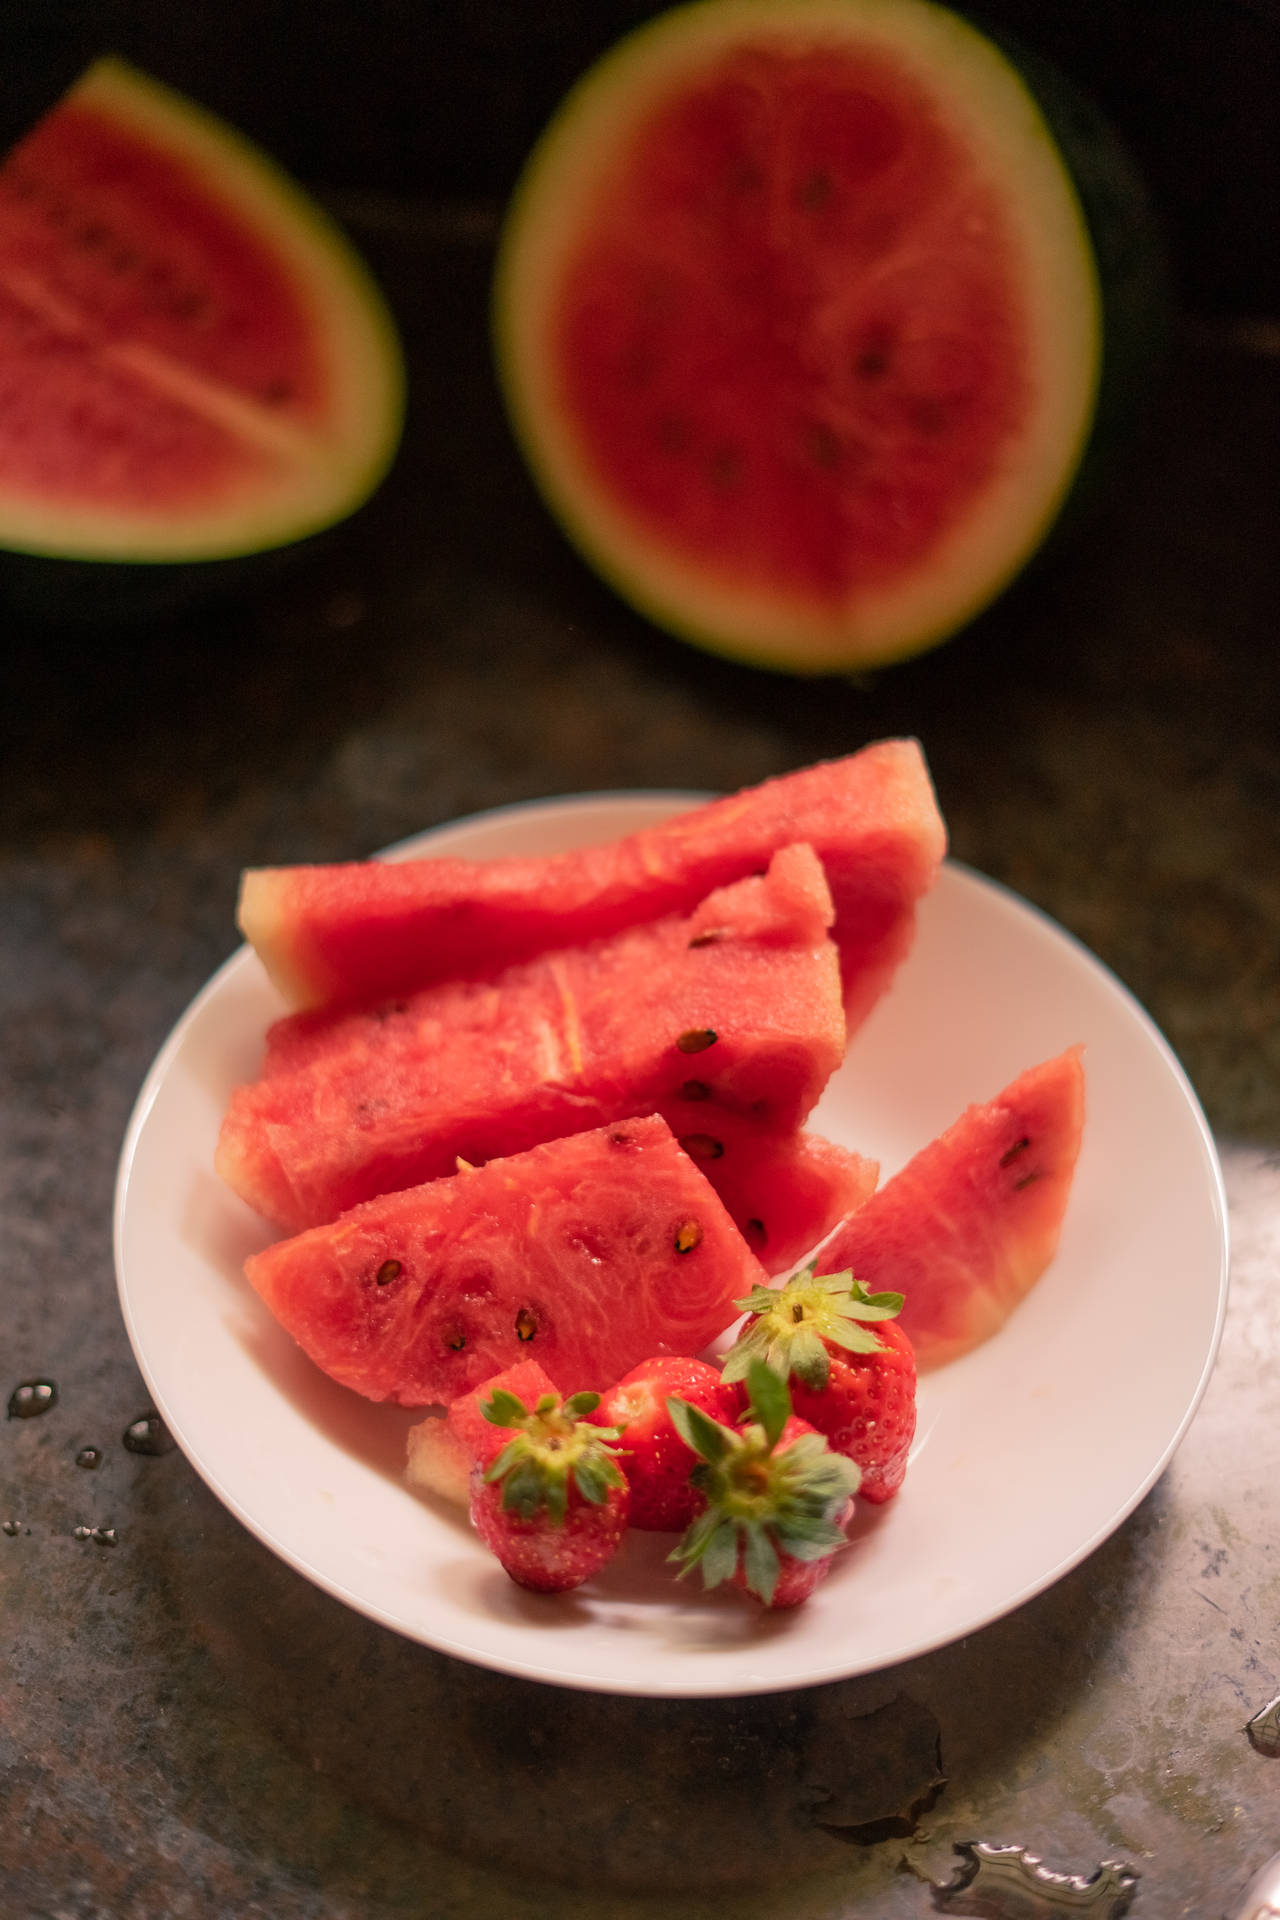 Watermelon And Strawberries